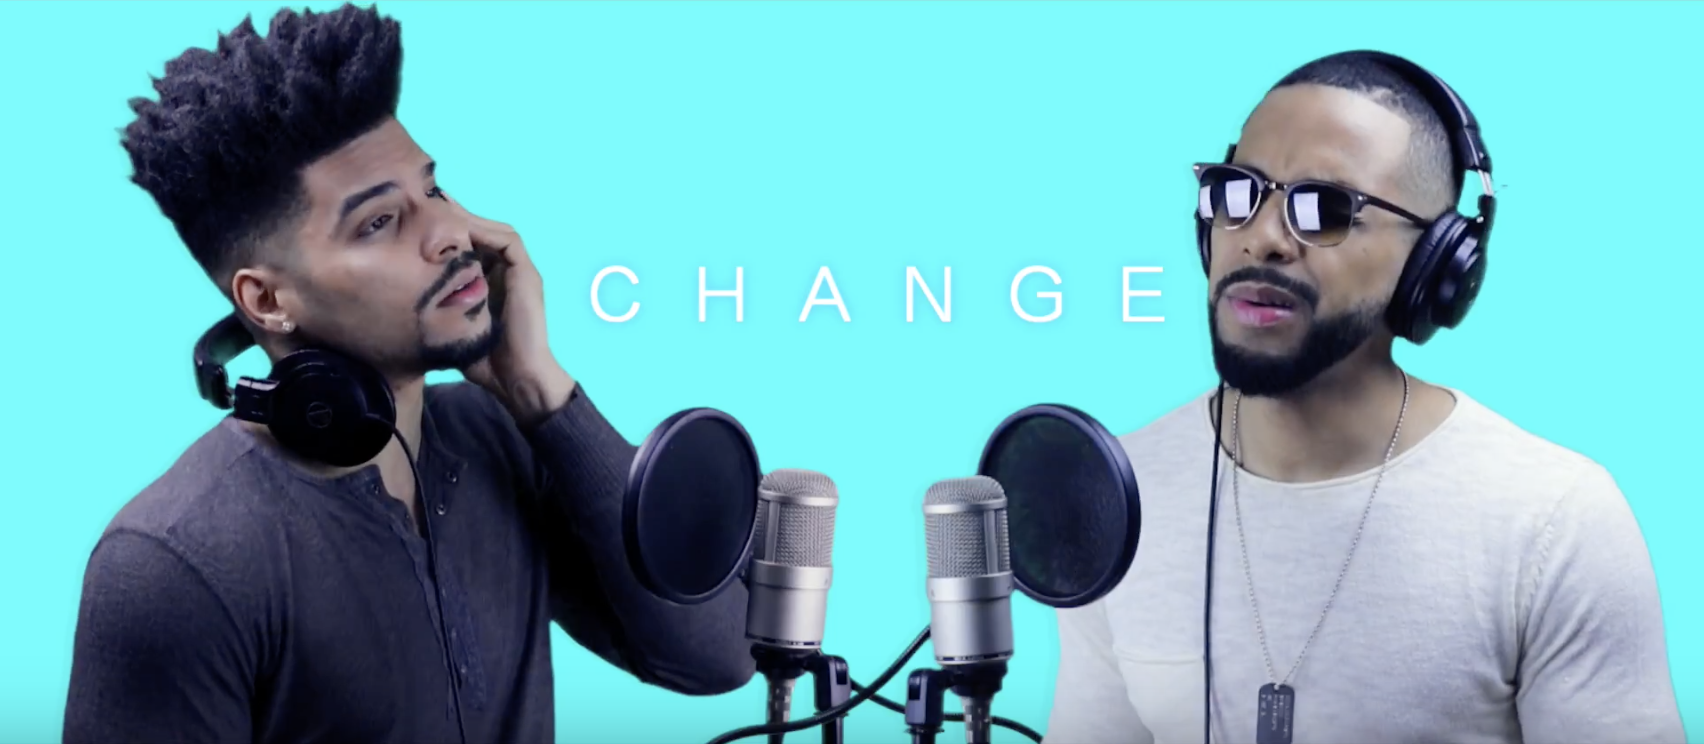 Charlie Puth - Change (SOLERO Official Cover)